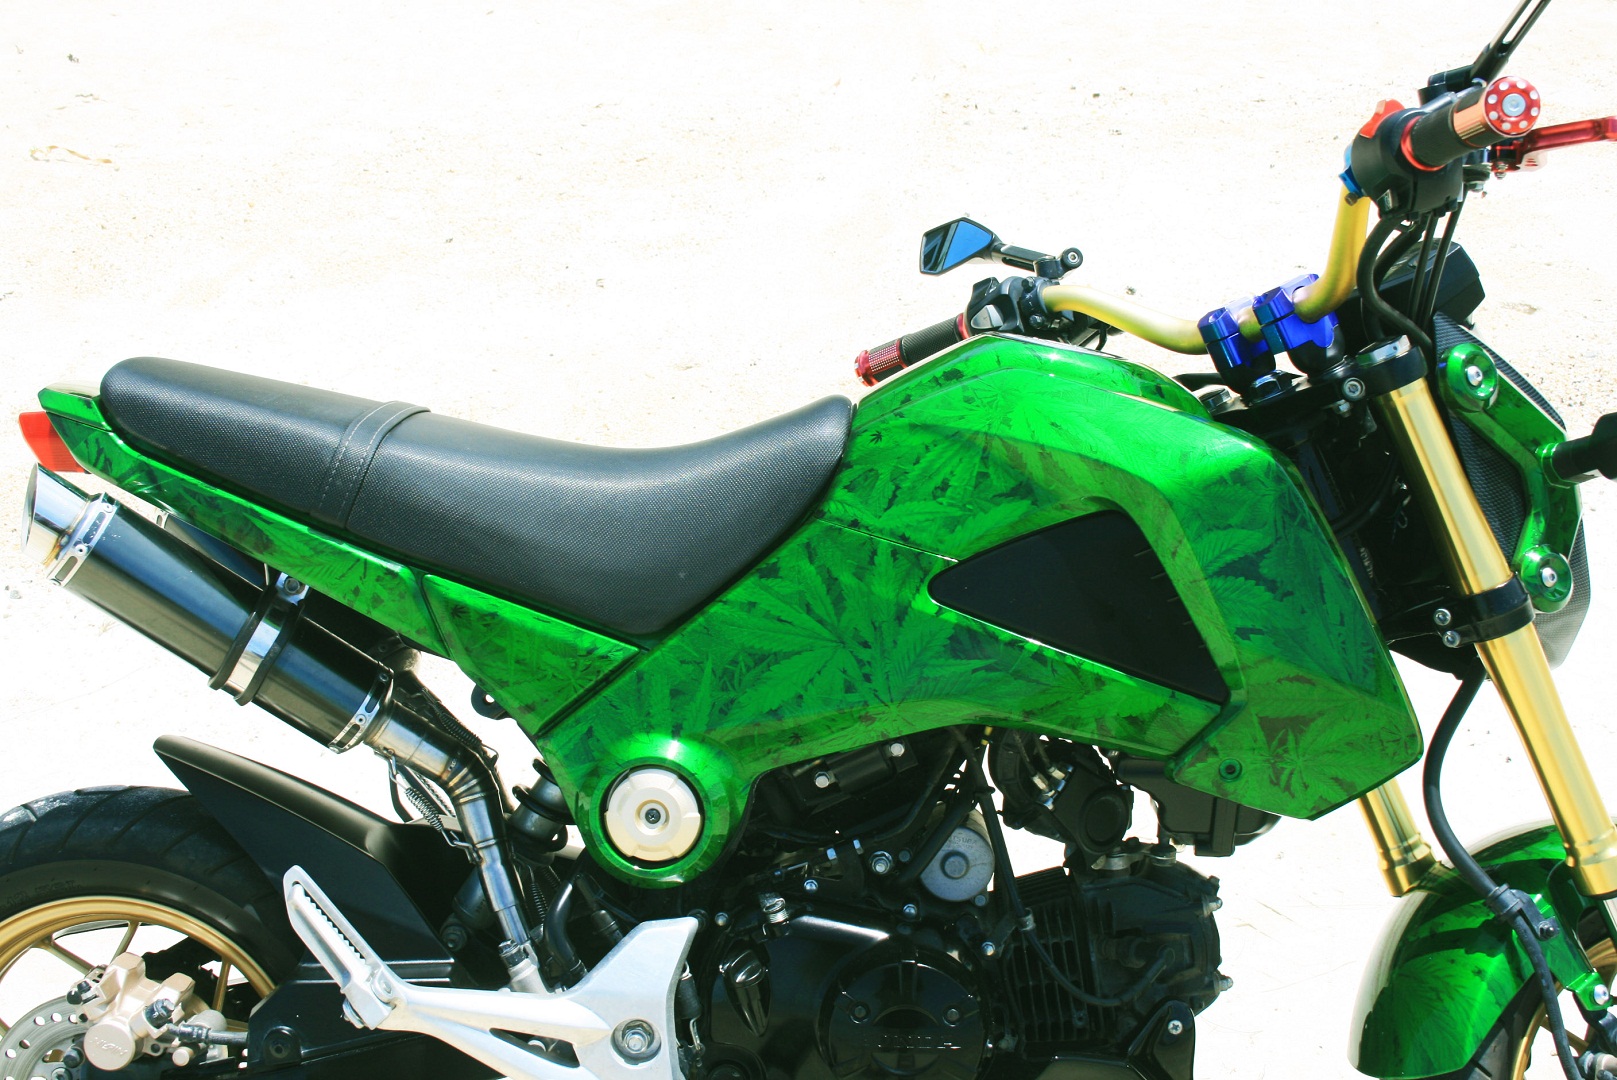 Honda Grom Msx 125, Hydro dipped in Kryptoflage (Rasta style Camouflage) Very popular with the young crowds!<br />One of the Body kits we sell here, and ship around the region.